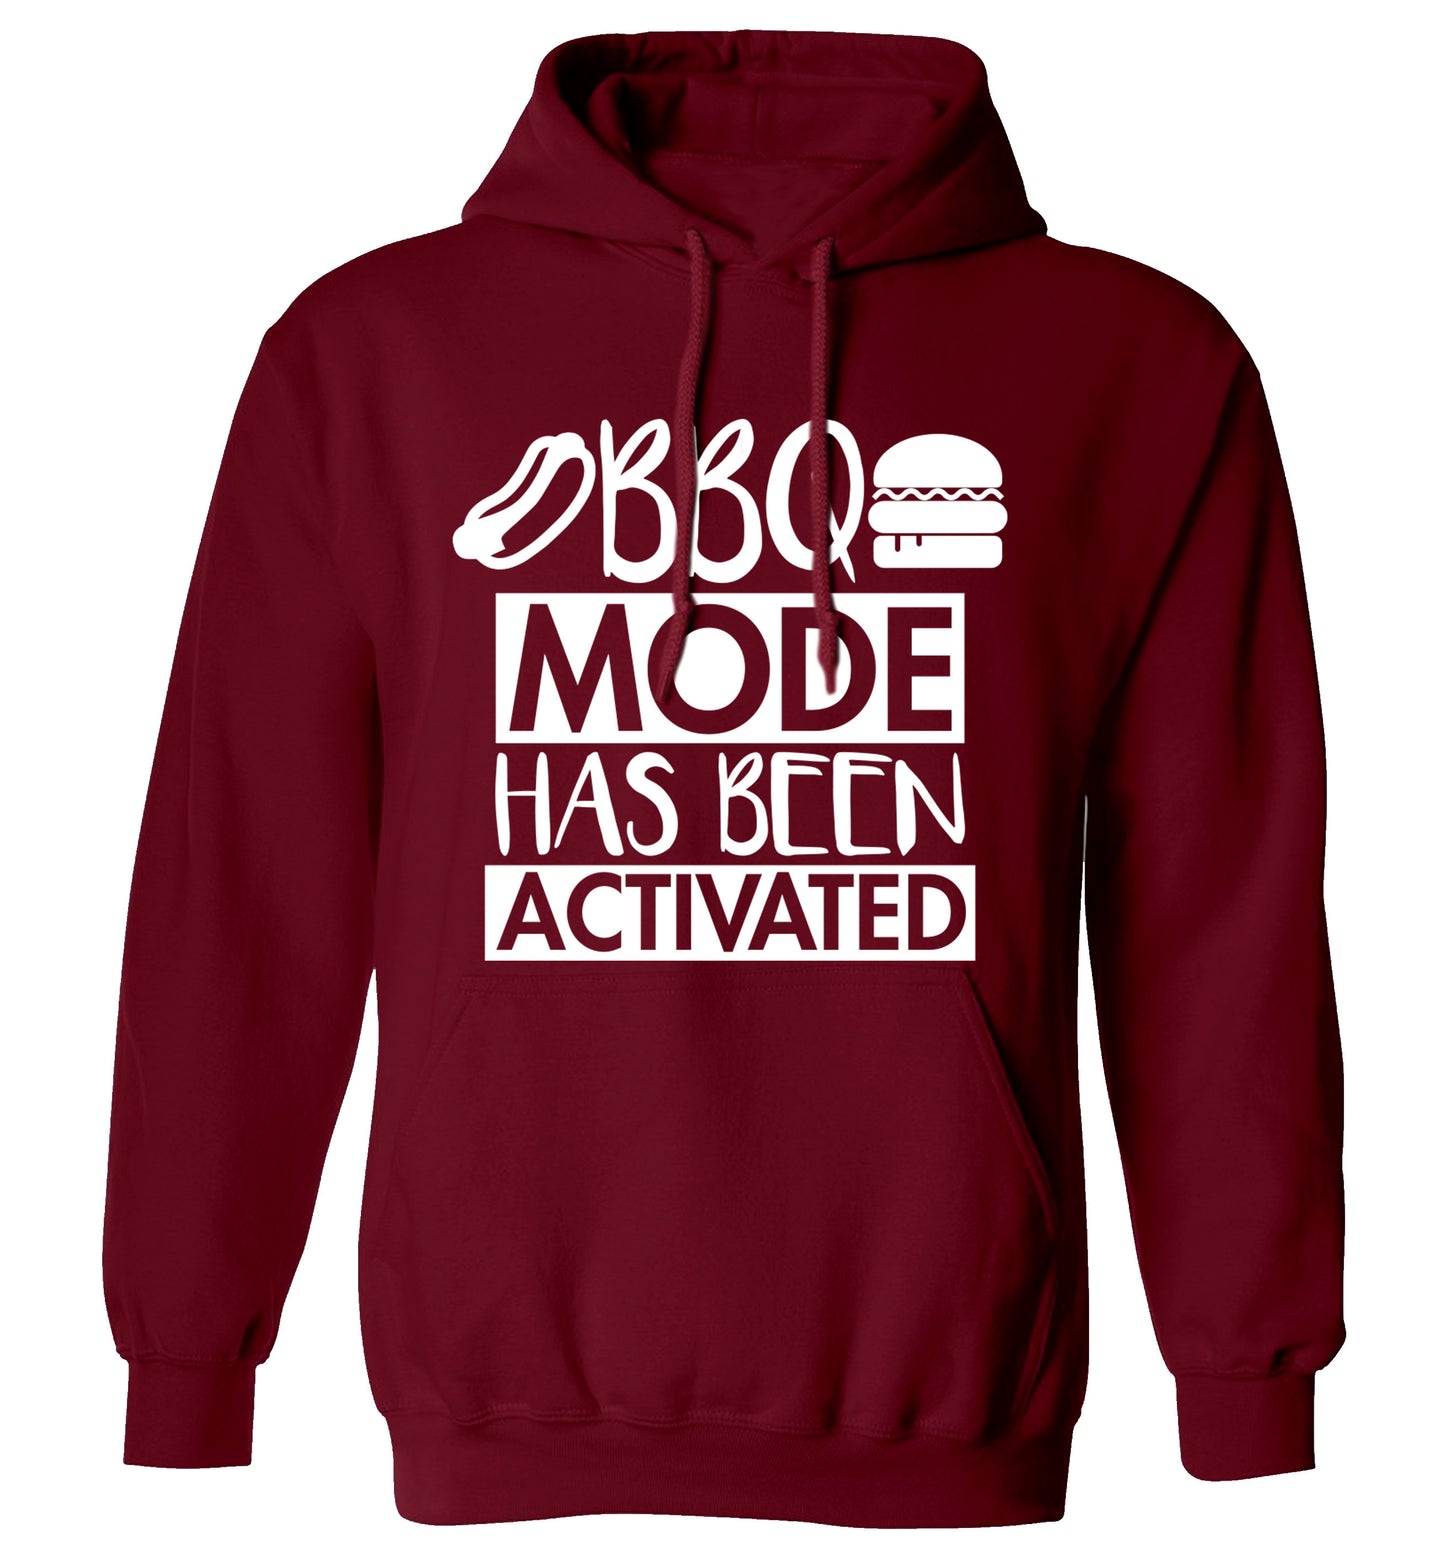 Bbq mode has been activated adults unisex maroon hoodie 2XL